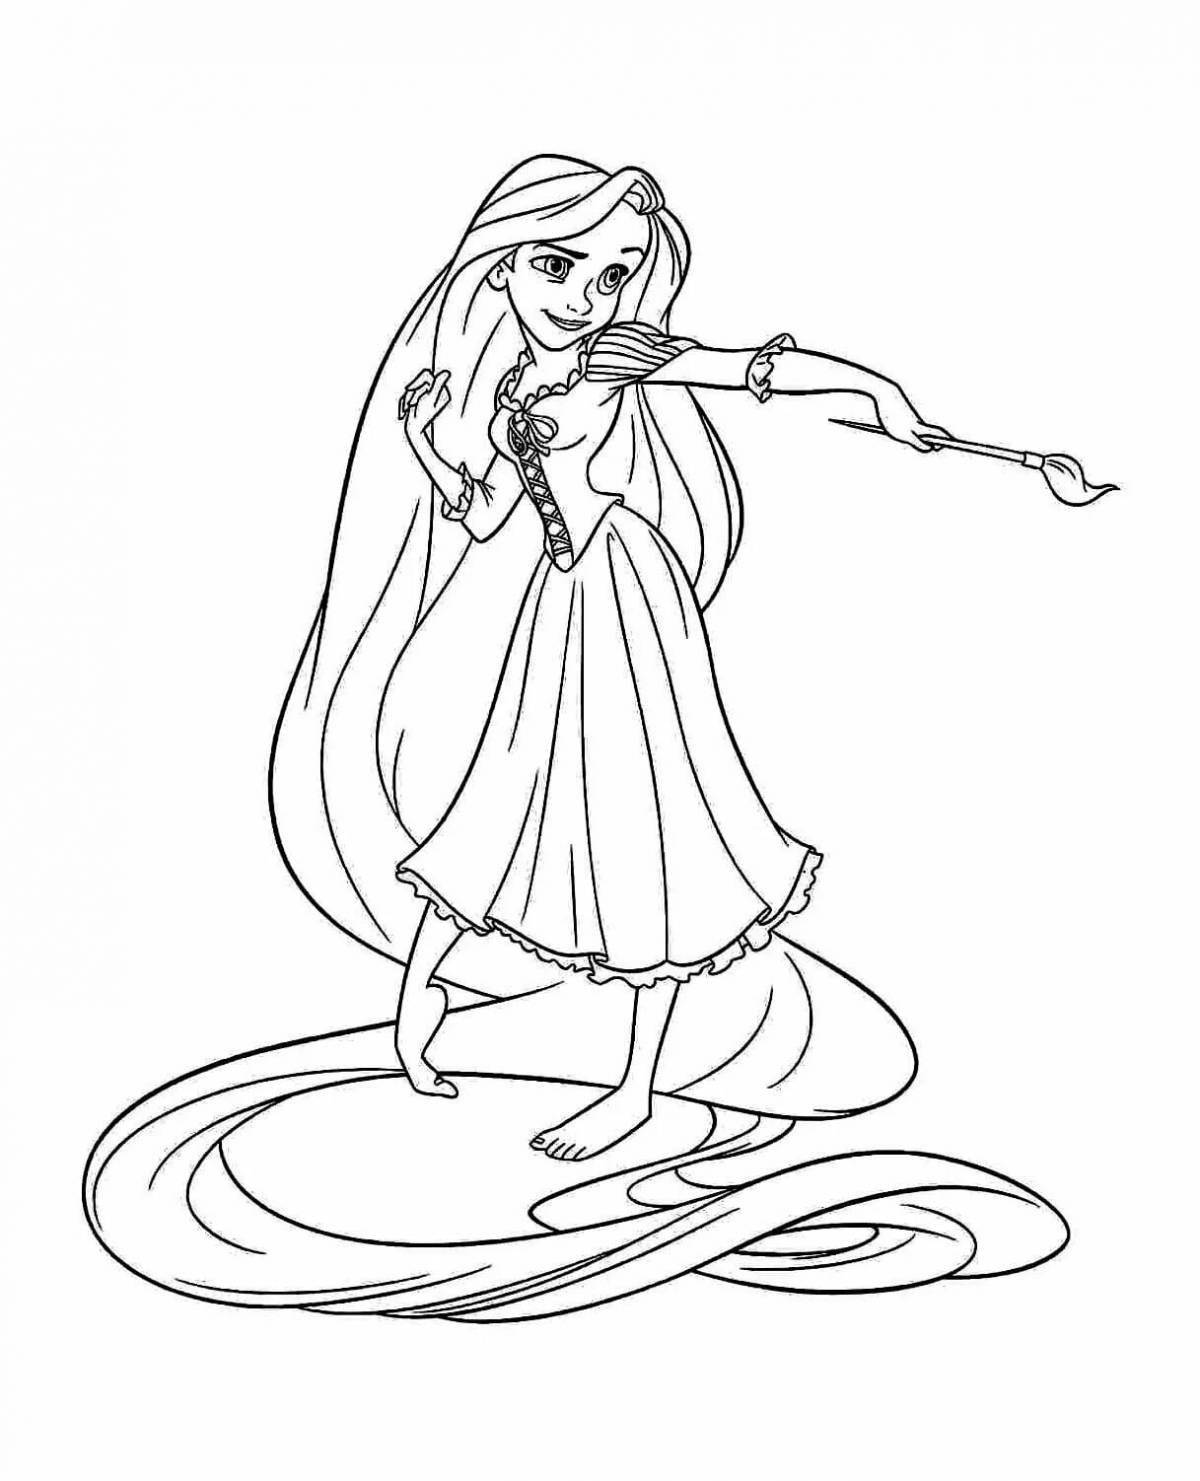 Colorful rapunzel coloring game